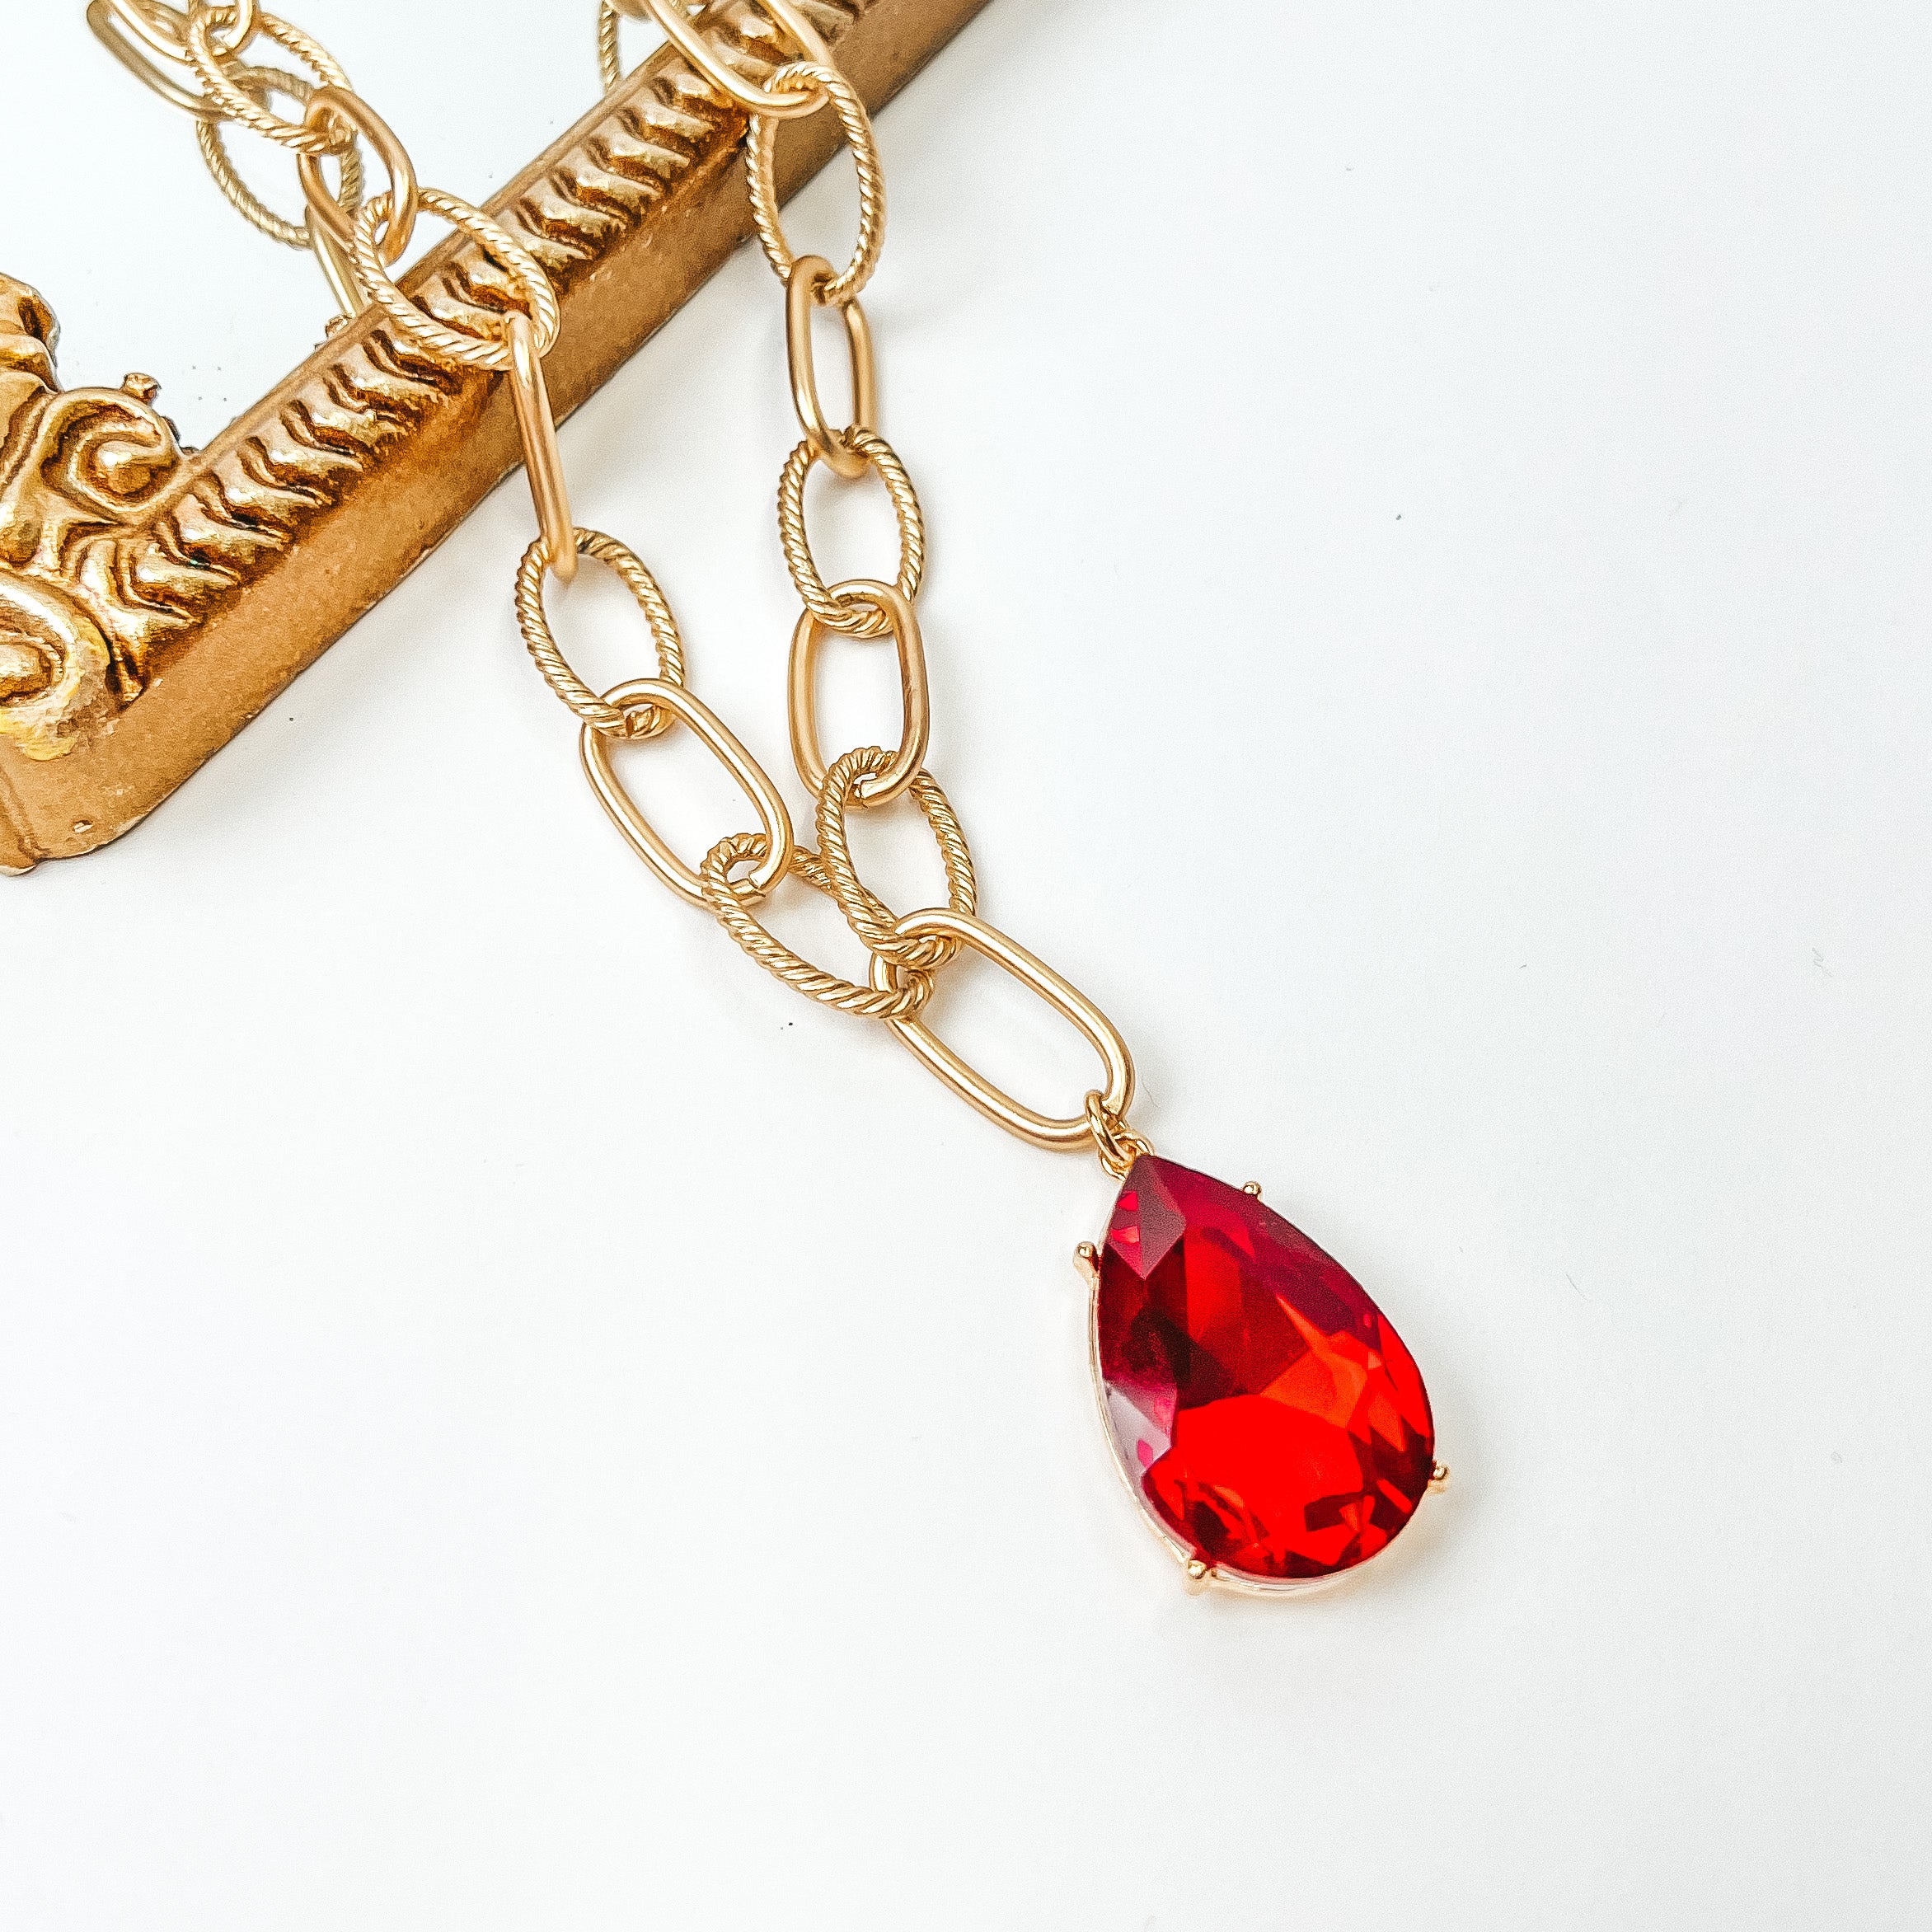 Pink Panache | Gold Tone Large Link Chain Necklace with Large Red Crystal Teardrop - Giddy Up Glamour Boutique